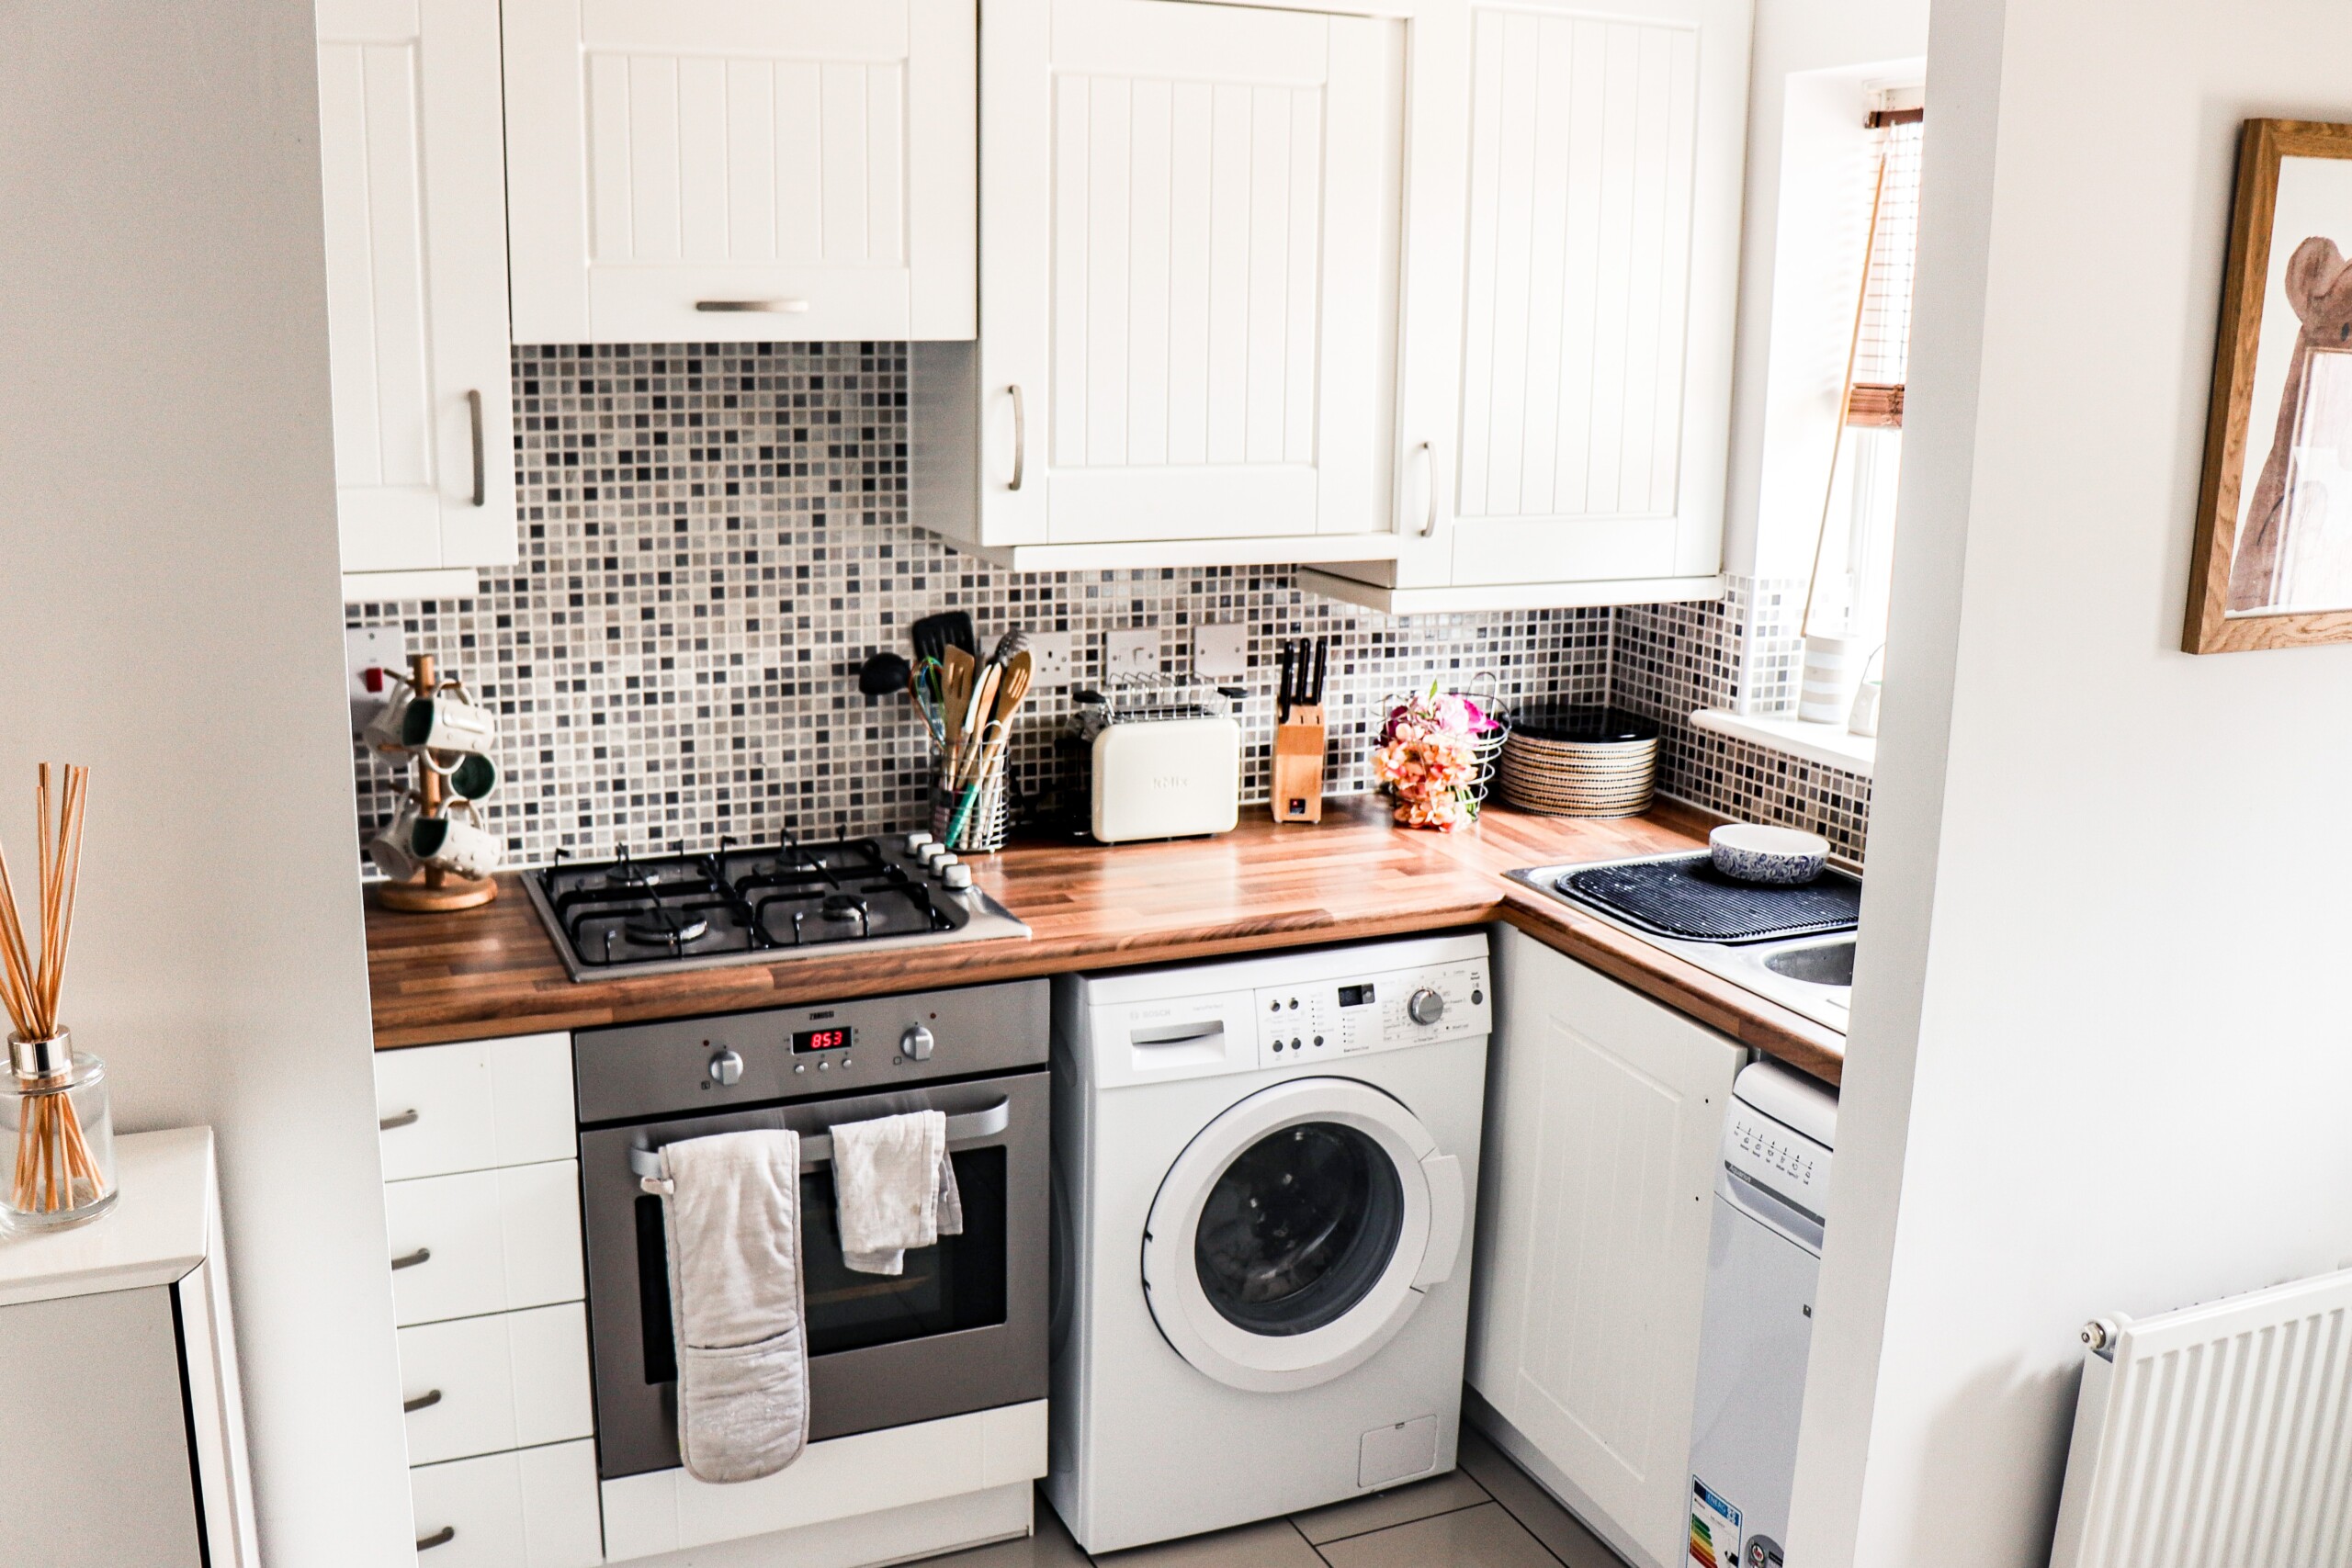 8 Smart Ways to Make More Space in a Small Kitchen